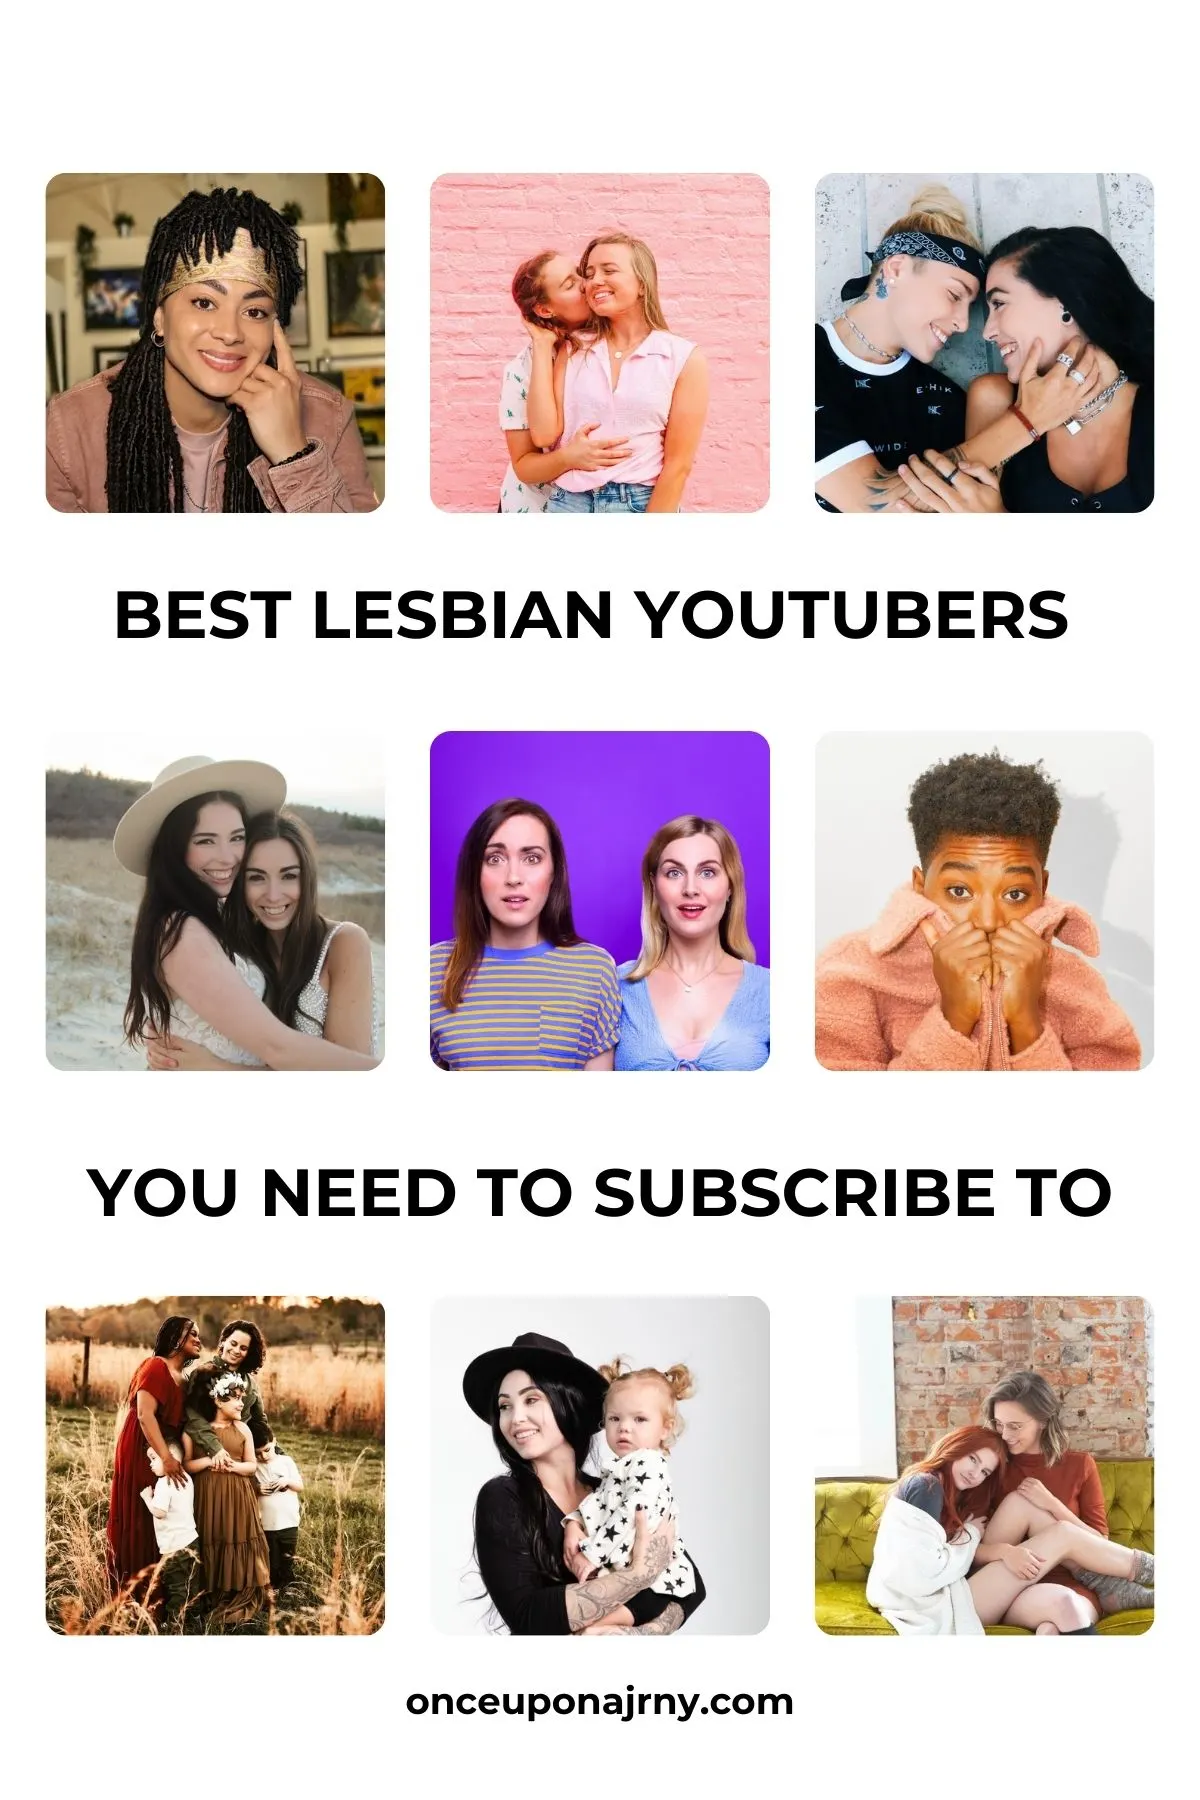 Lesbian YouTube Lesbian YouTubers You need to subscribe to